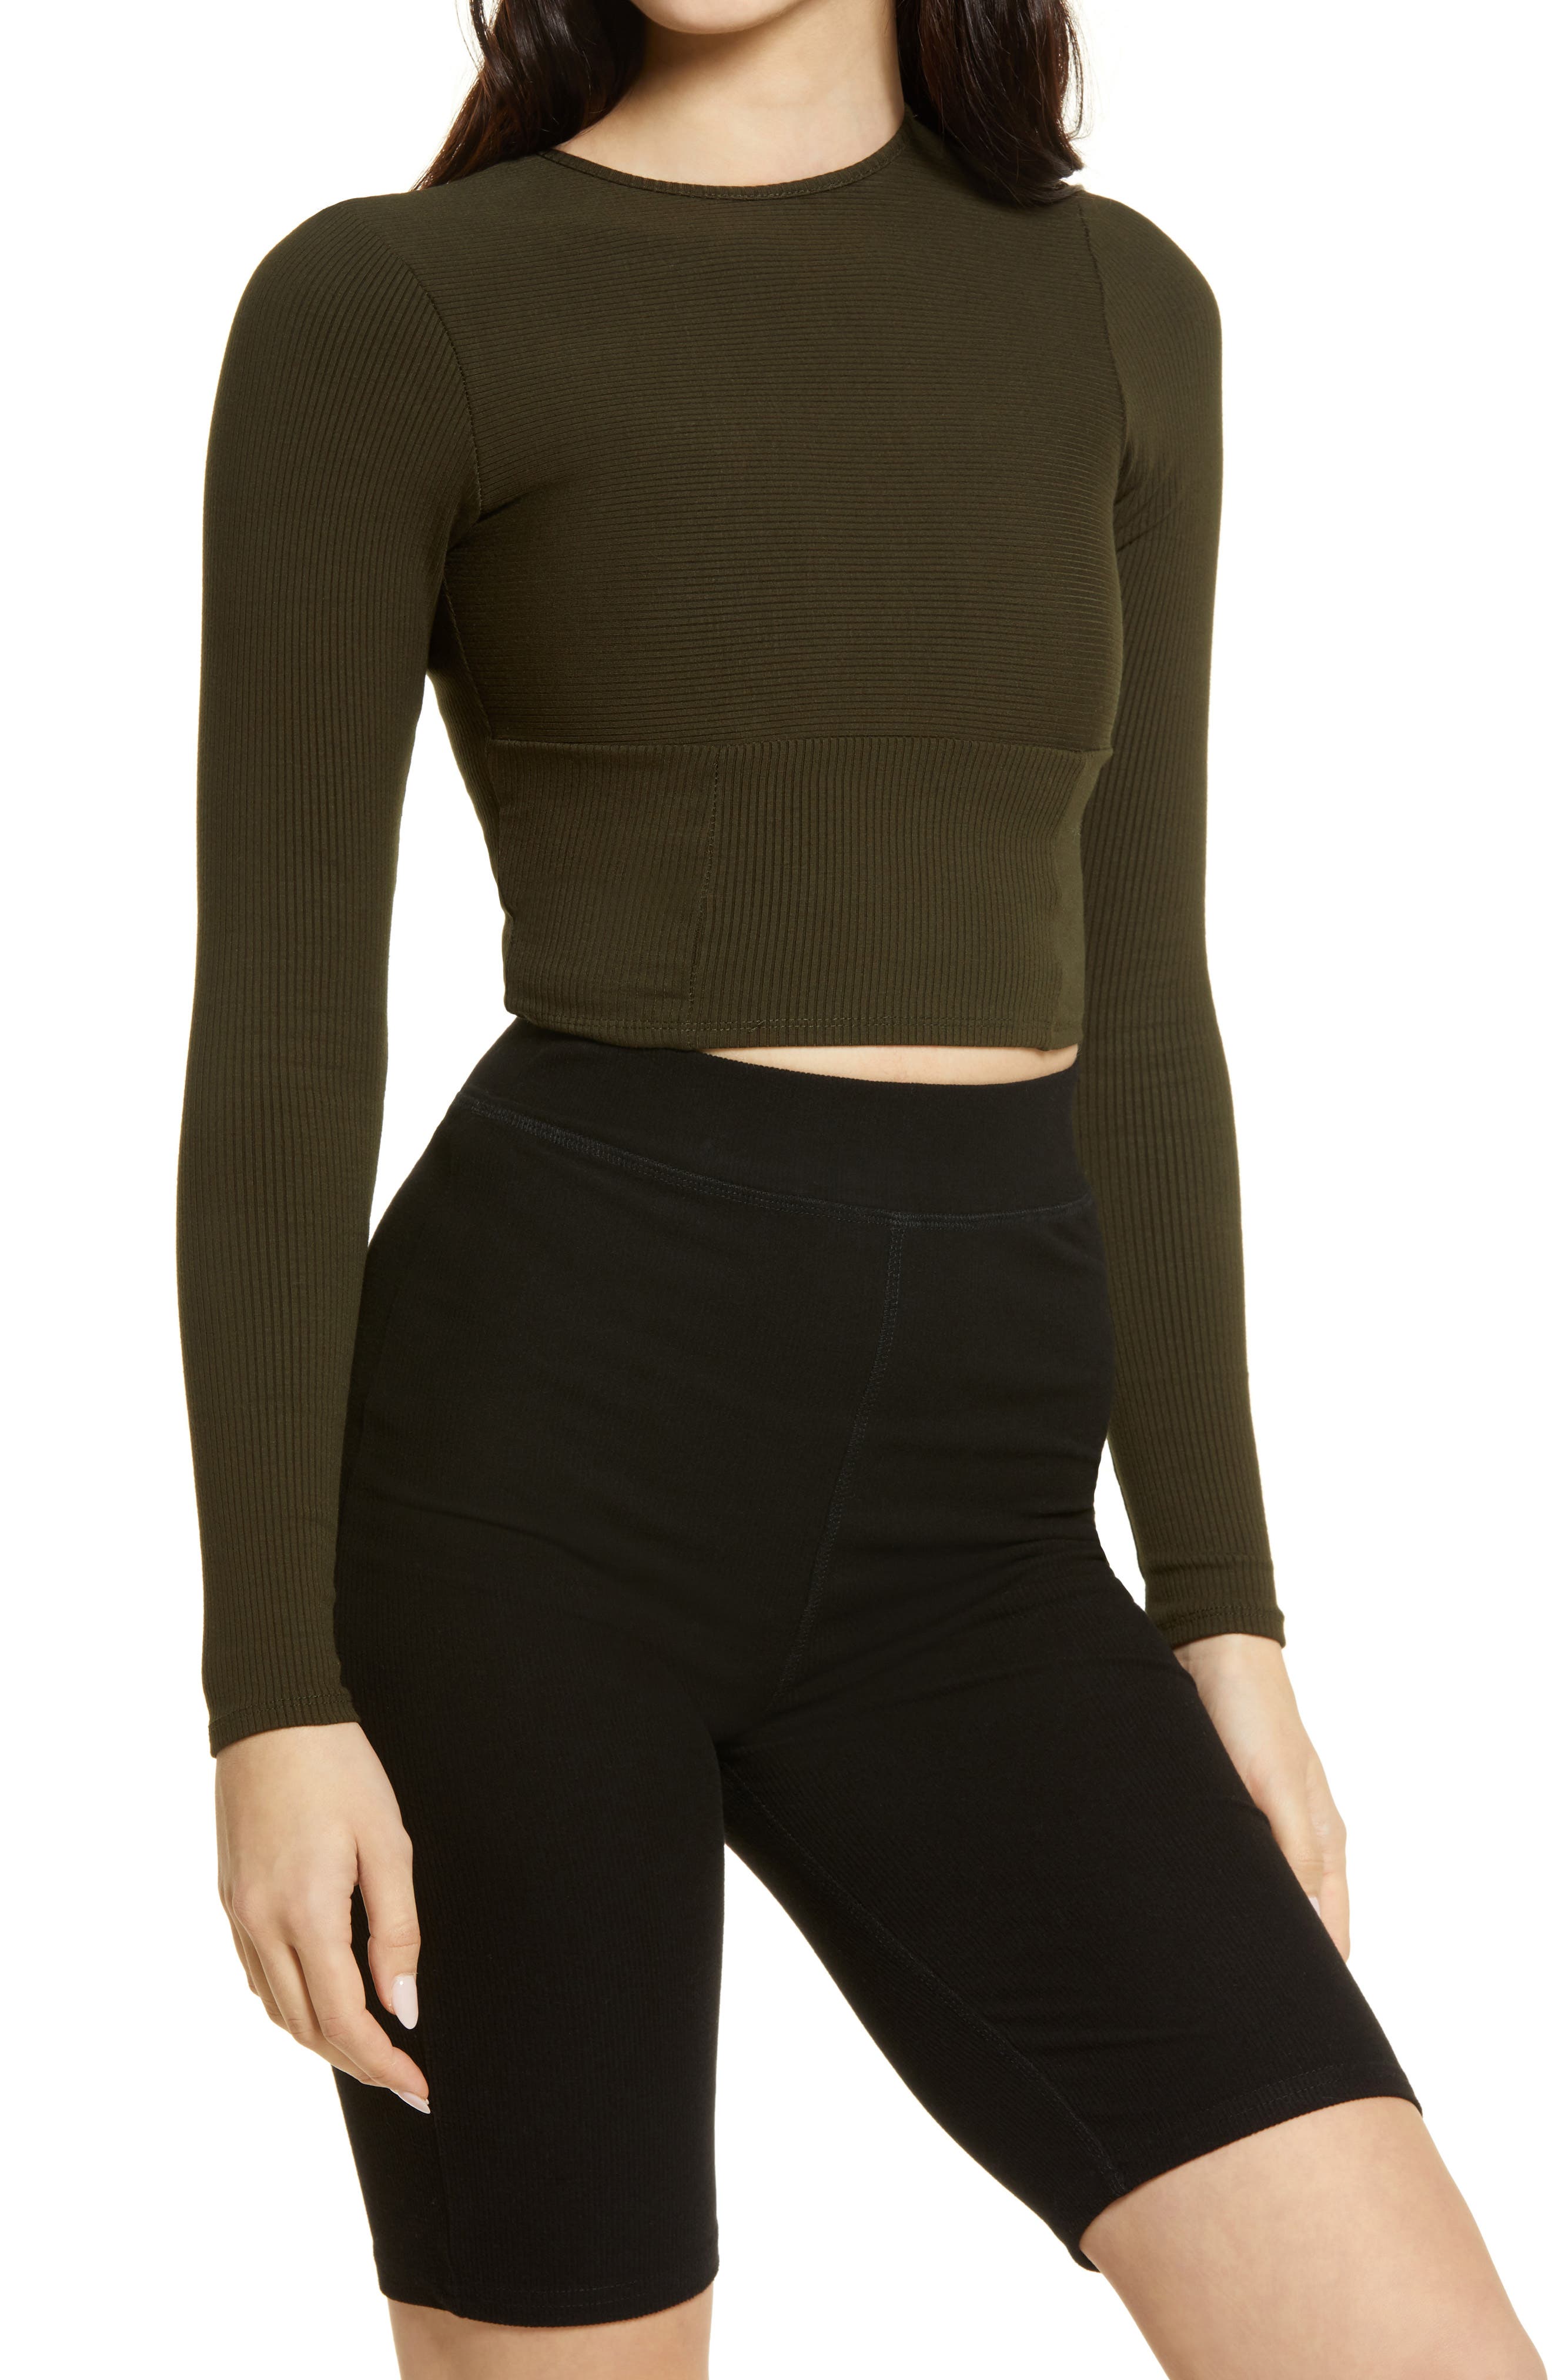 NAKED WARDROBE SNATCHED BUSTIER LONG SLEEVE CROP TOP,194876015050